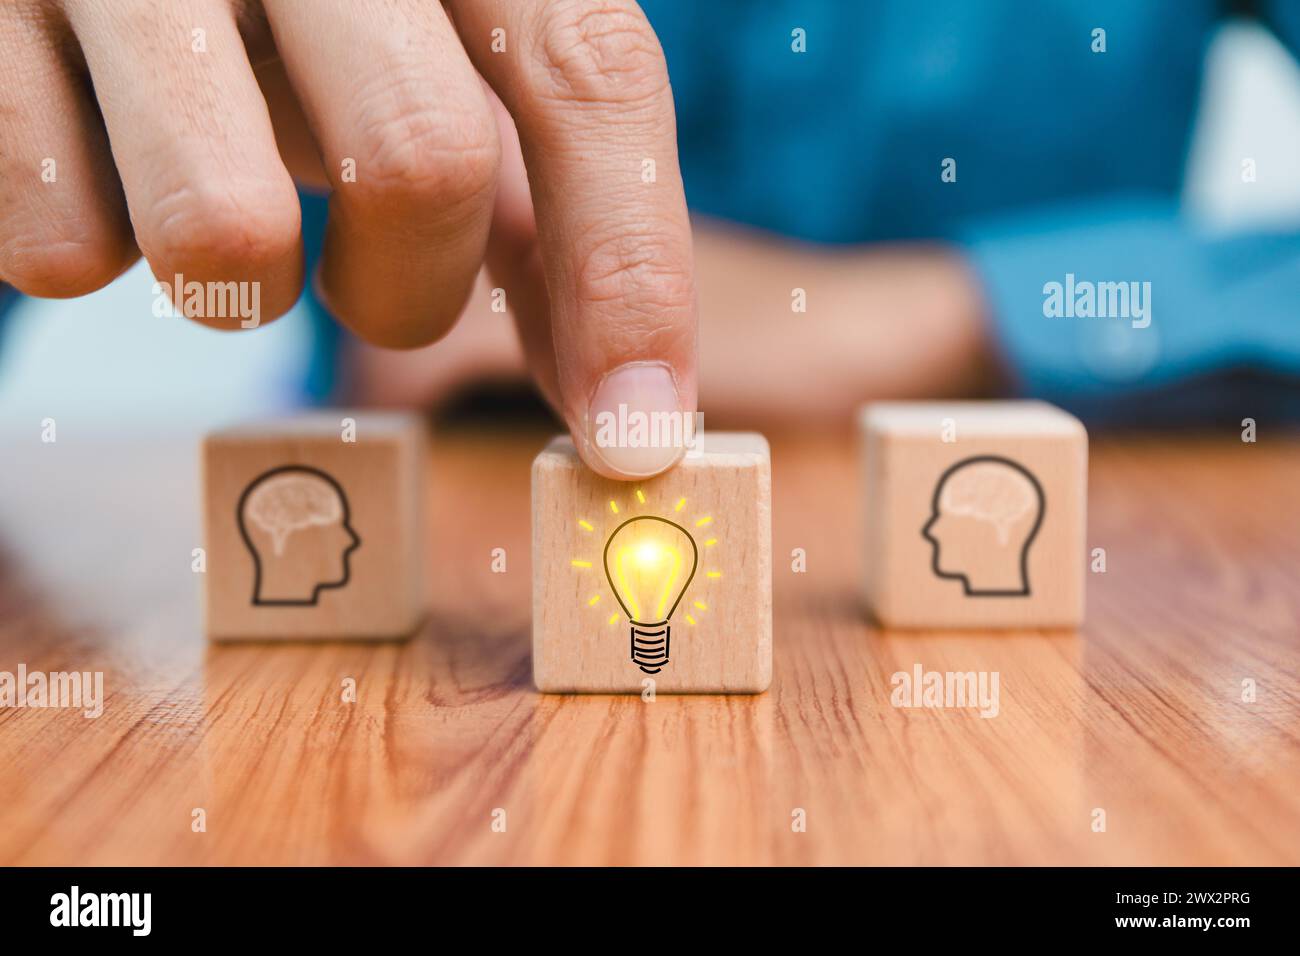 brainstorming creative idea and innovation. Hand putting over wooden cube block with light bulb icon on many people together having an idea symbolized Stock Photo